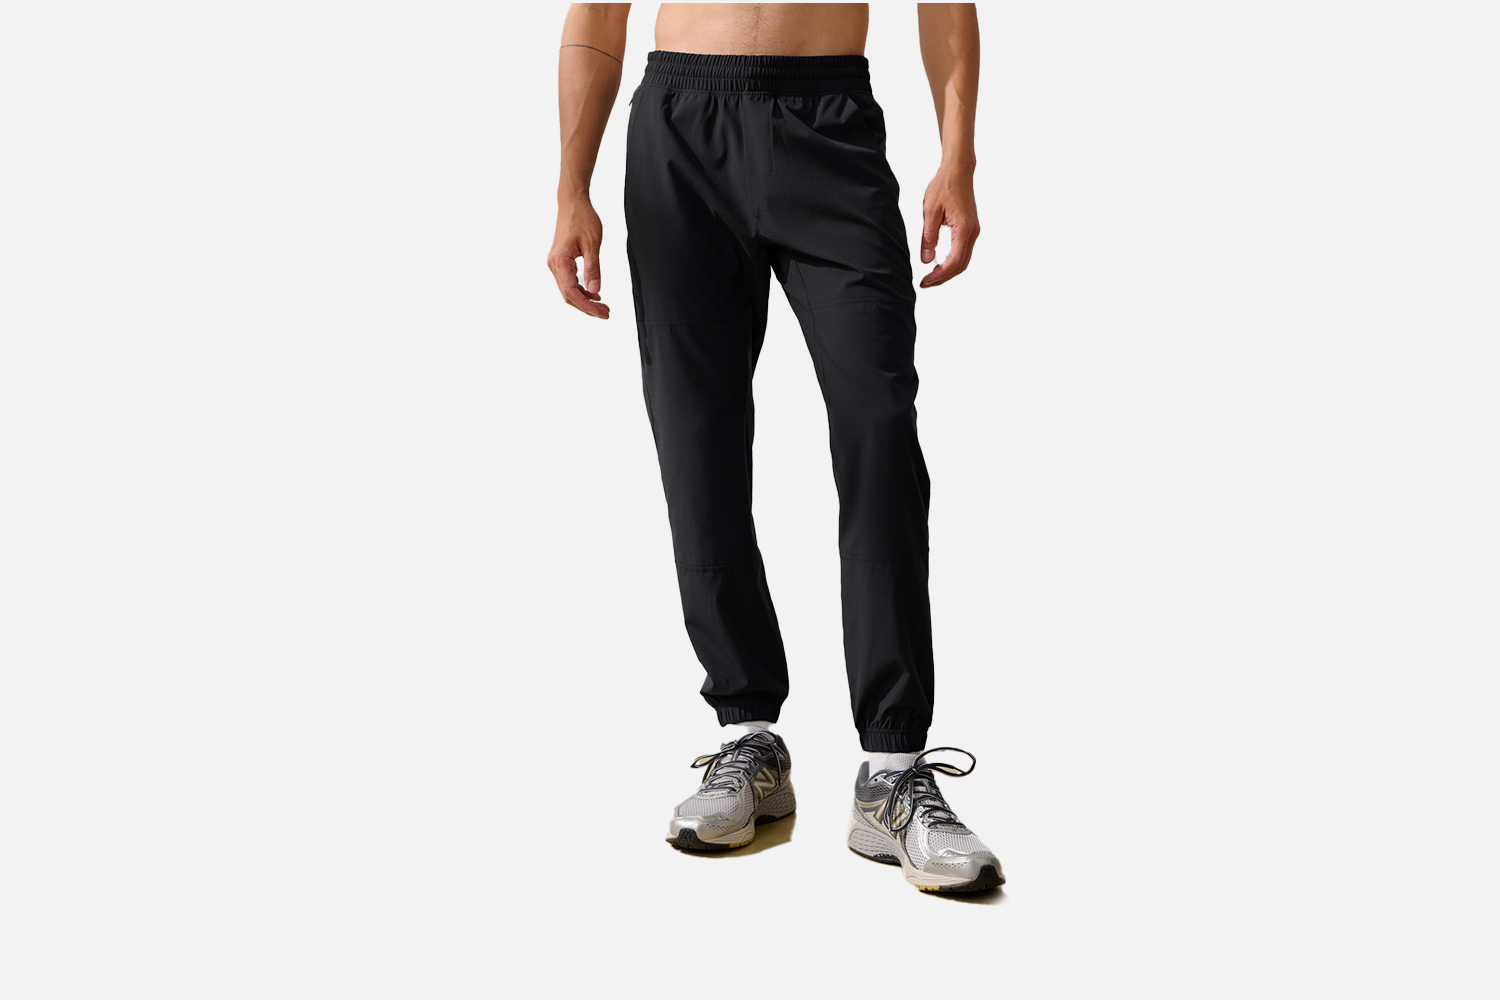 Abercrombie & Fitch YPB motionTEK Training Jogger